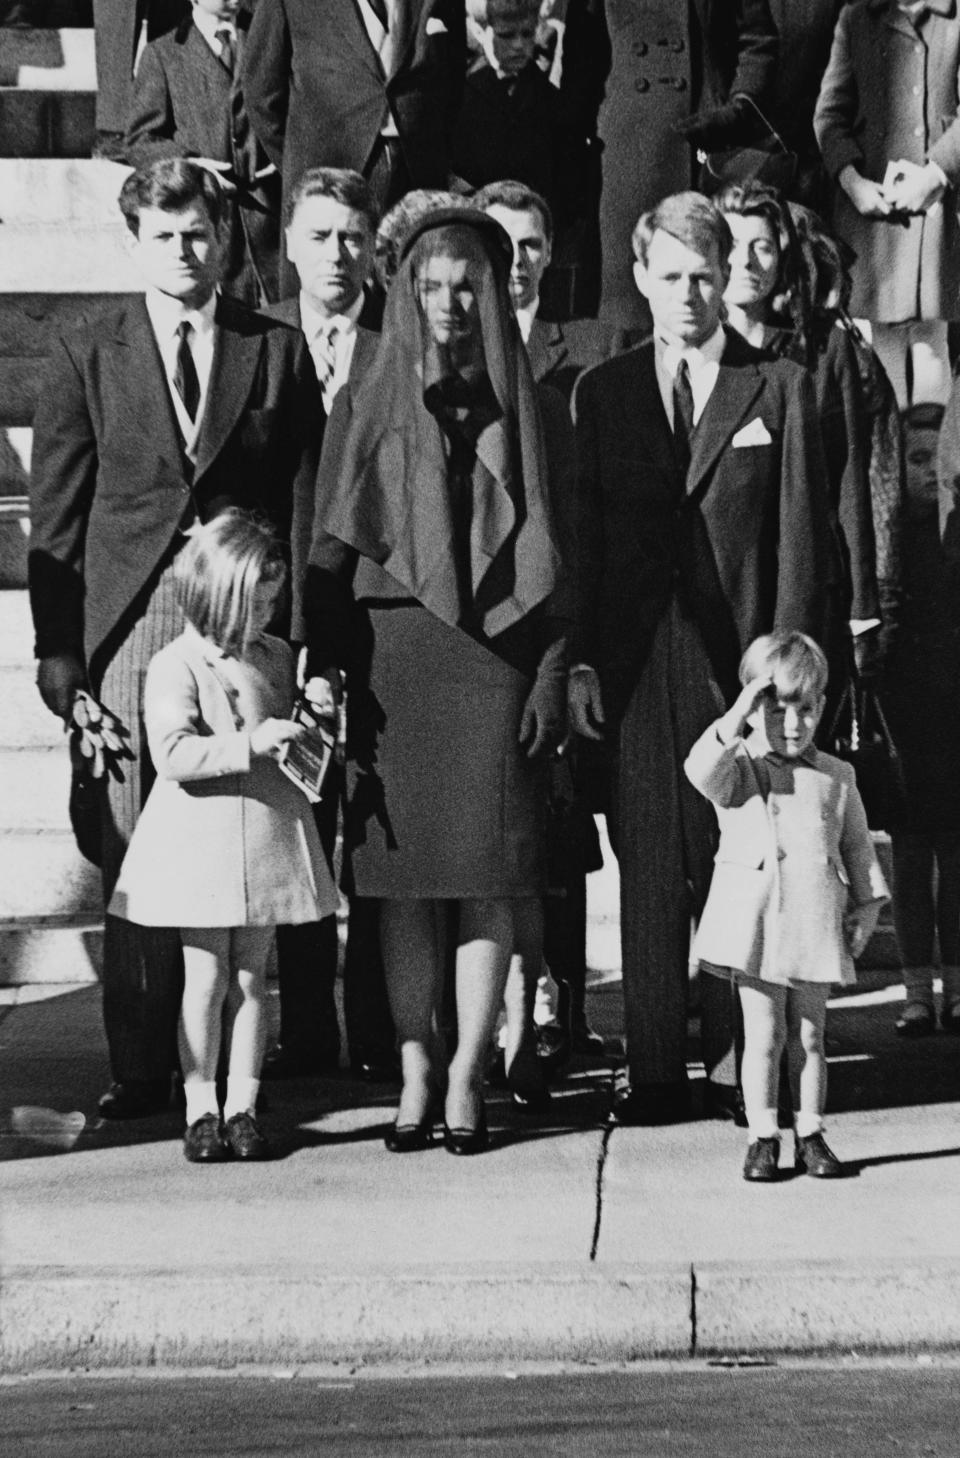 Members of the Kennedy family at the funeral of assassinated president John F. Kennedy at Washington DC. From left: Senator Edward Kennedy, Caroline Kennedy, (aged 6), Jackie Kennedy (1929 - 1994), Attorney General Robert Kennedy and John Kennedy (1960 - 1999) (aged 3).